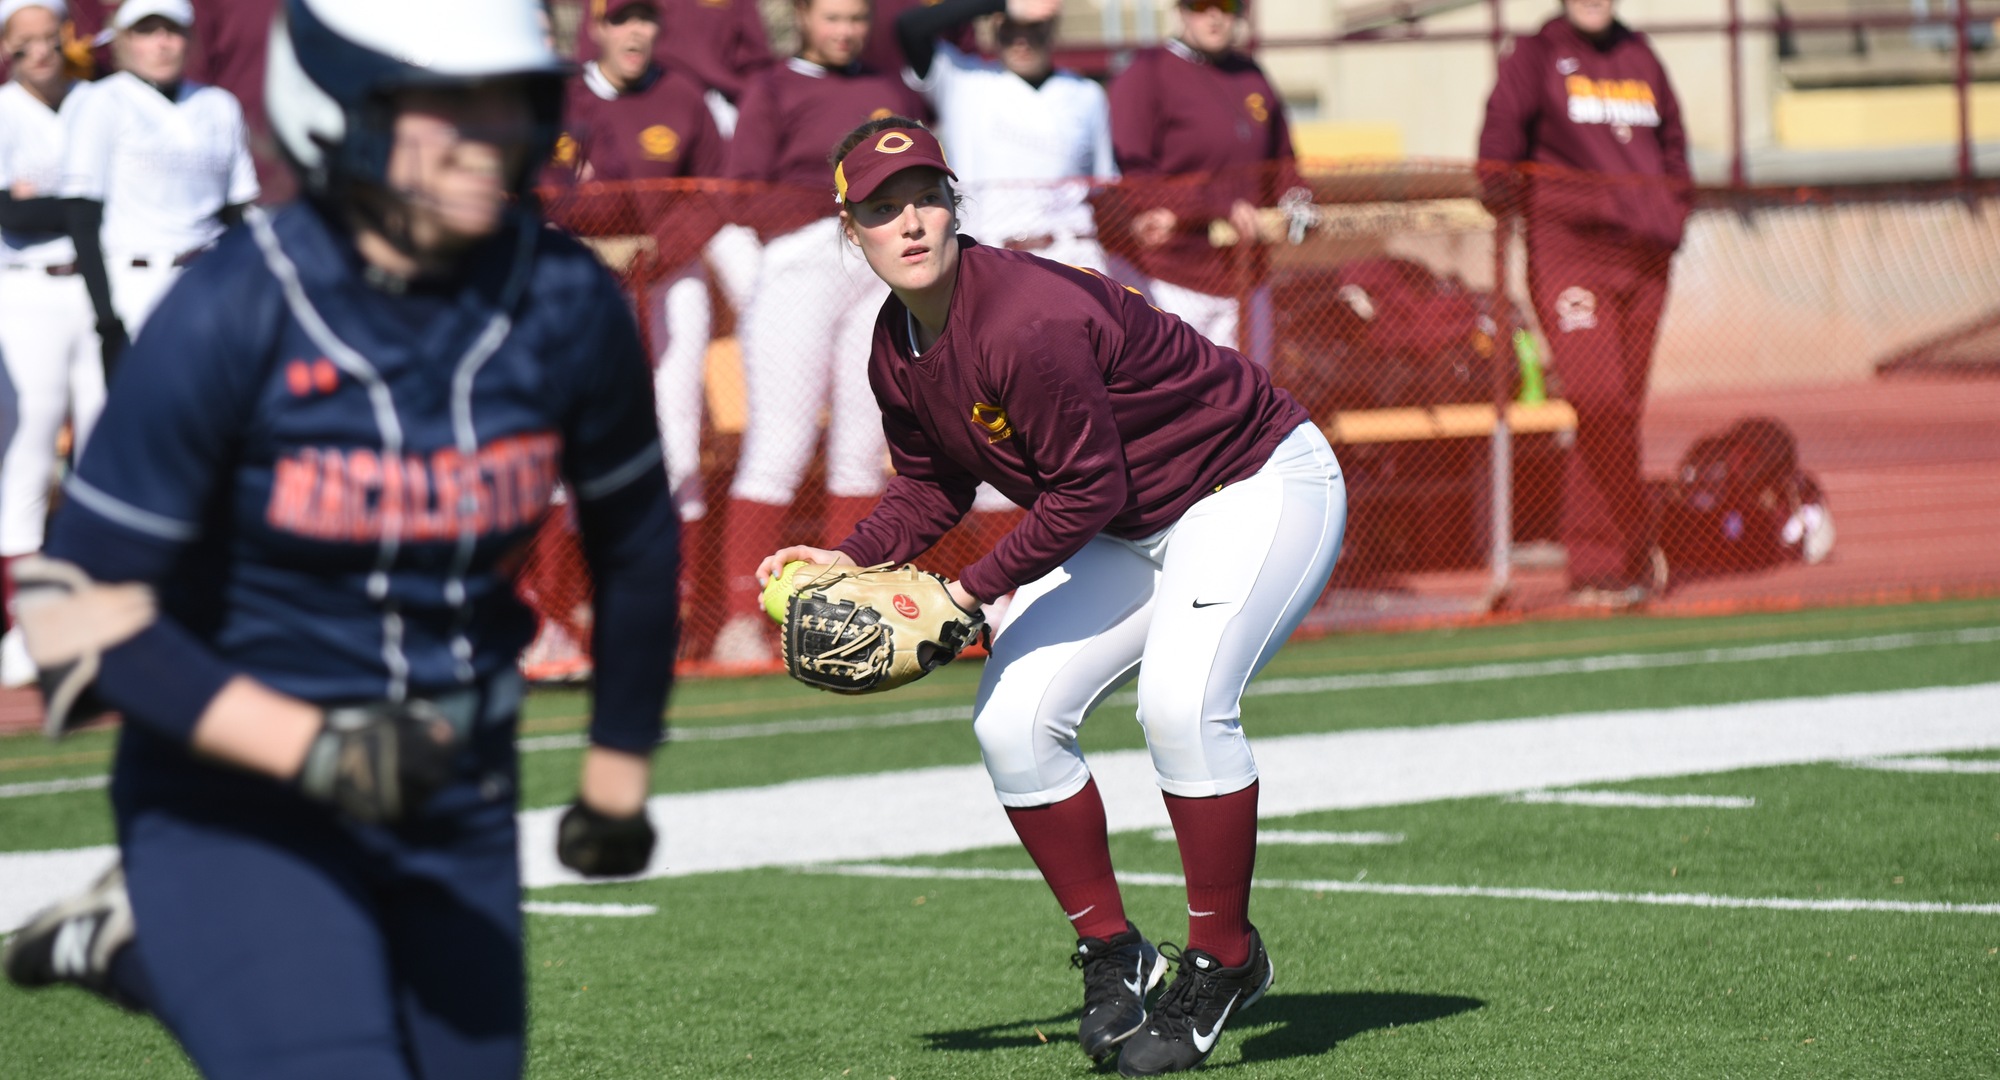 Cobber third baseman Taylor Erholtz gets ready to make the throw to first base to record an out in the Cobbers' home opener with Macalester.